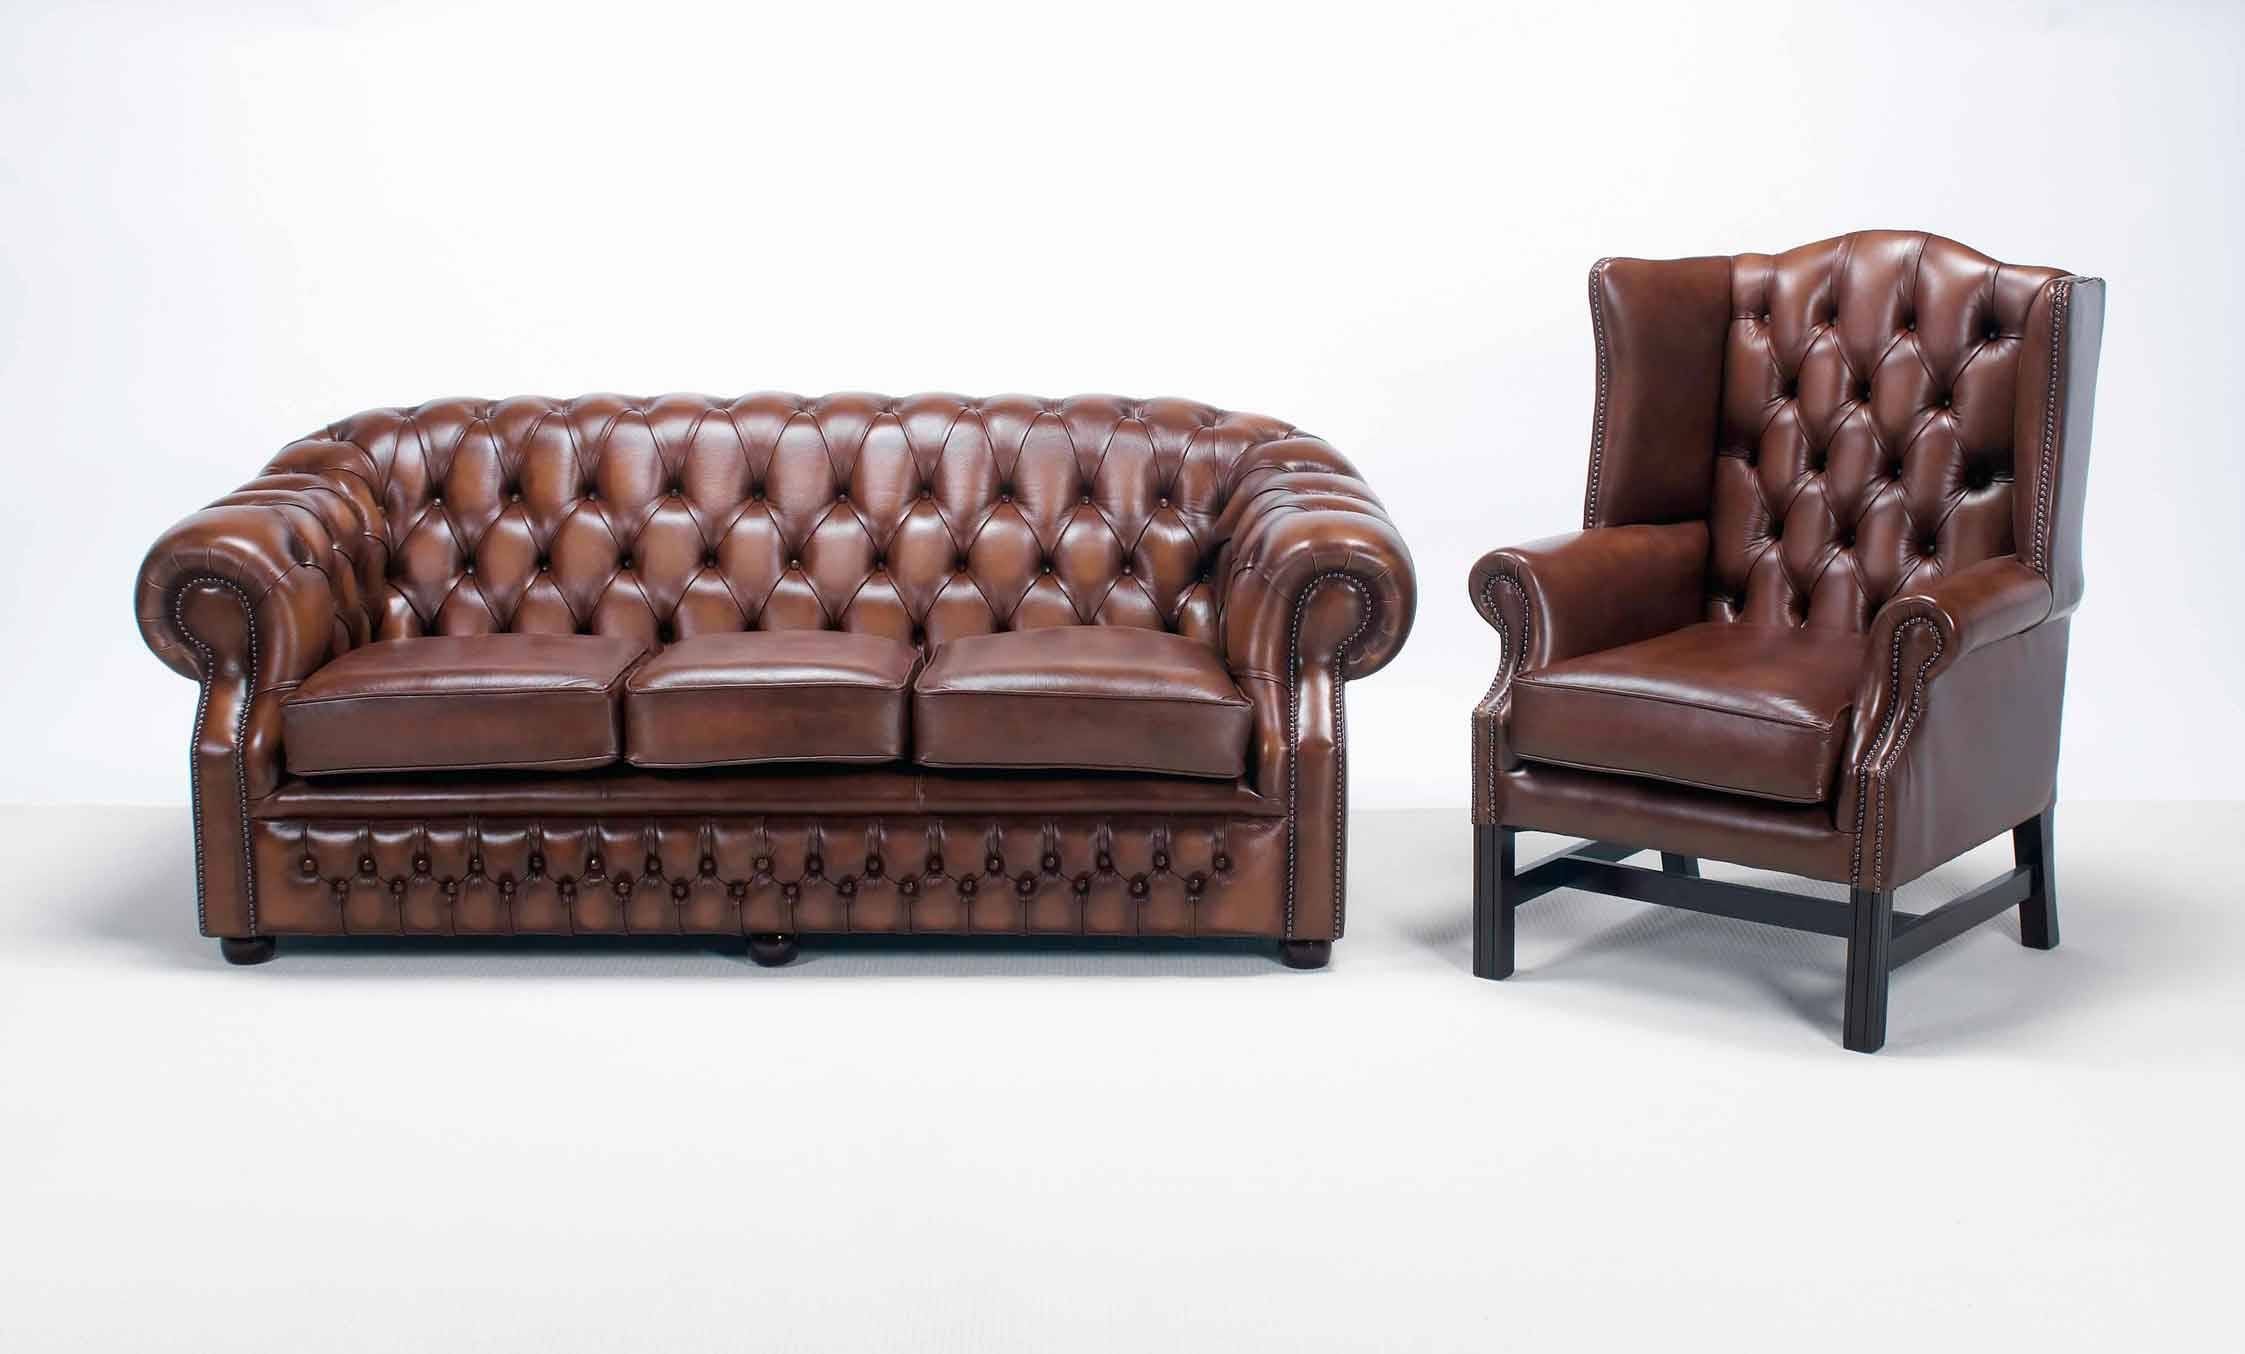 How To Identify A Real Chesterfield Sofa — Interior Home Design Intended For Chesterfield Sofa And Chairs (View 4 of 30)